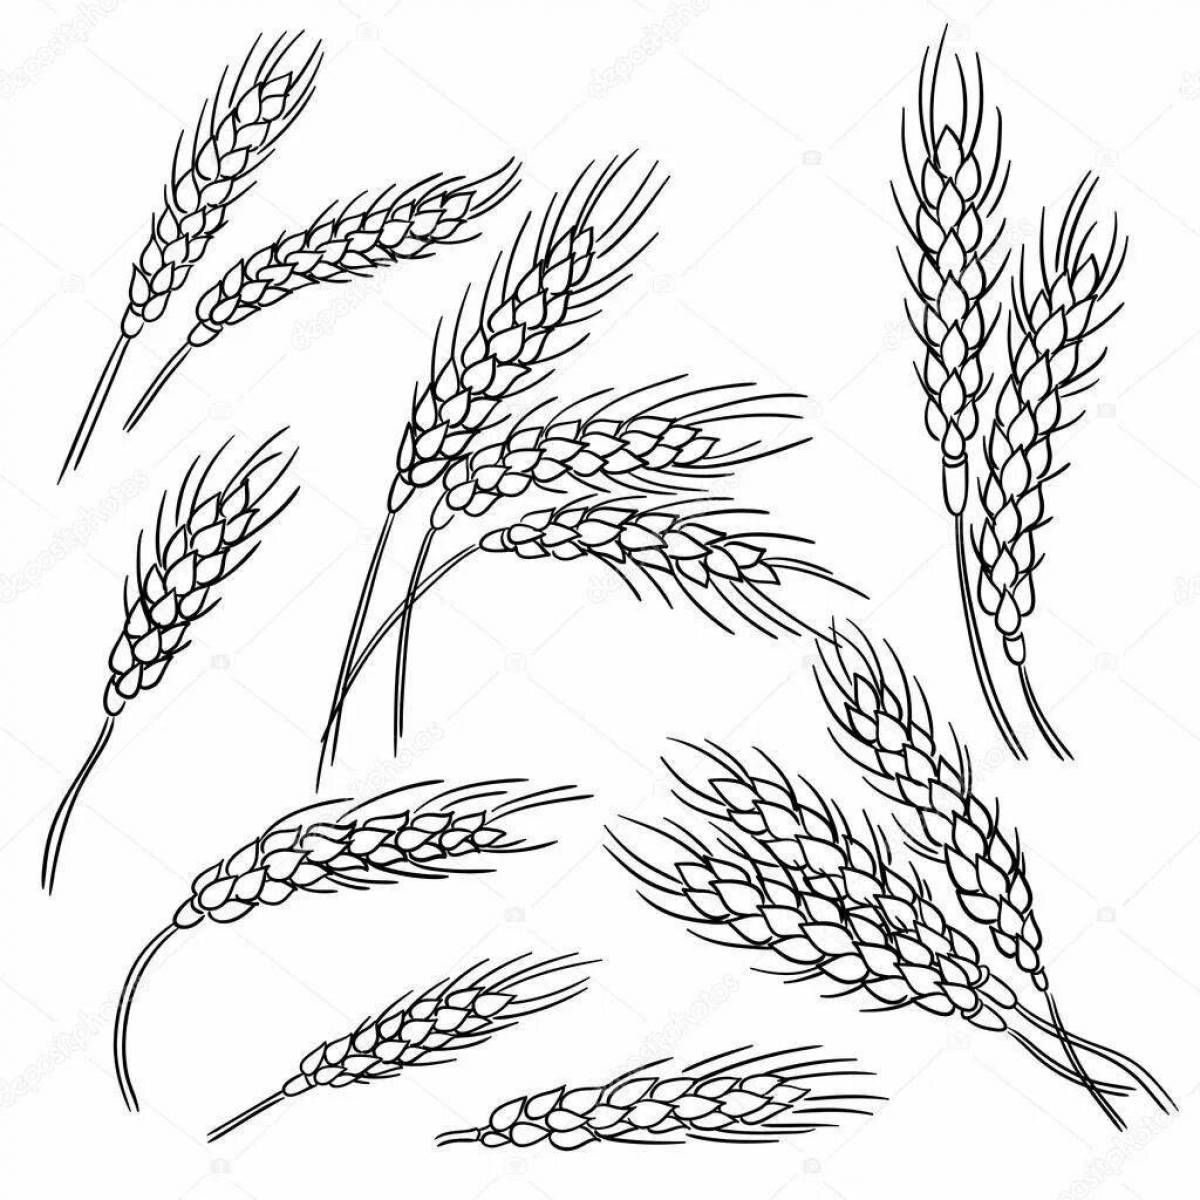 Coloring wheat spikelet for children